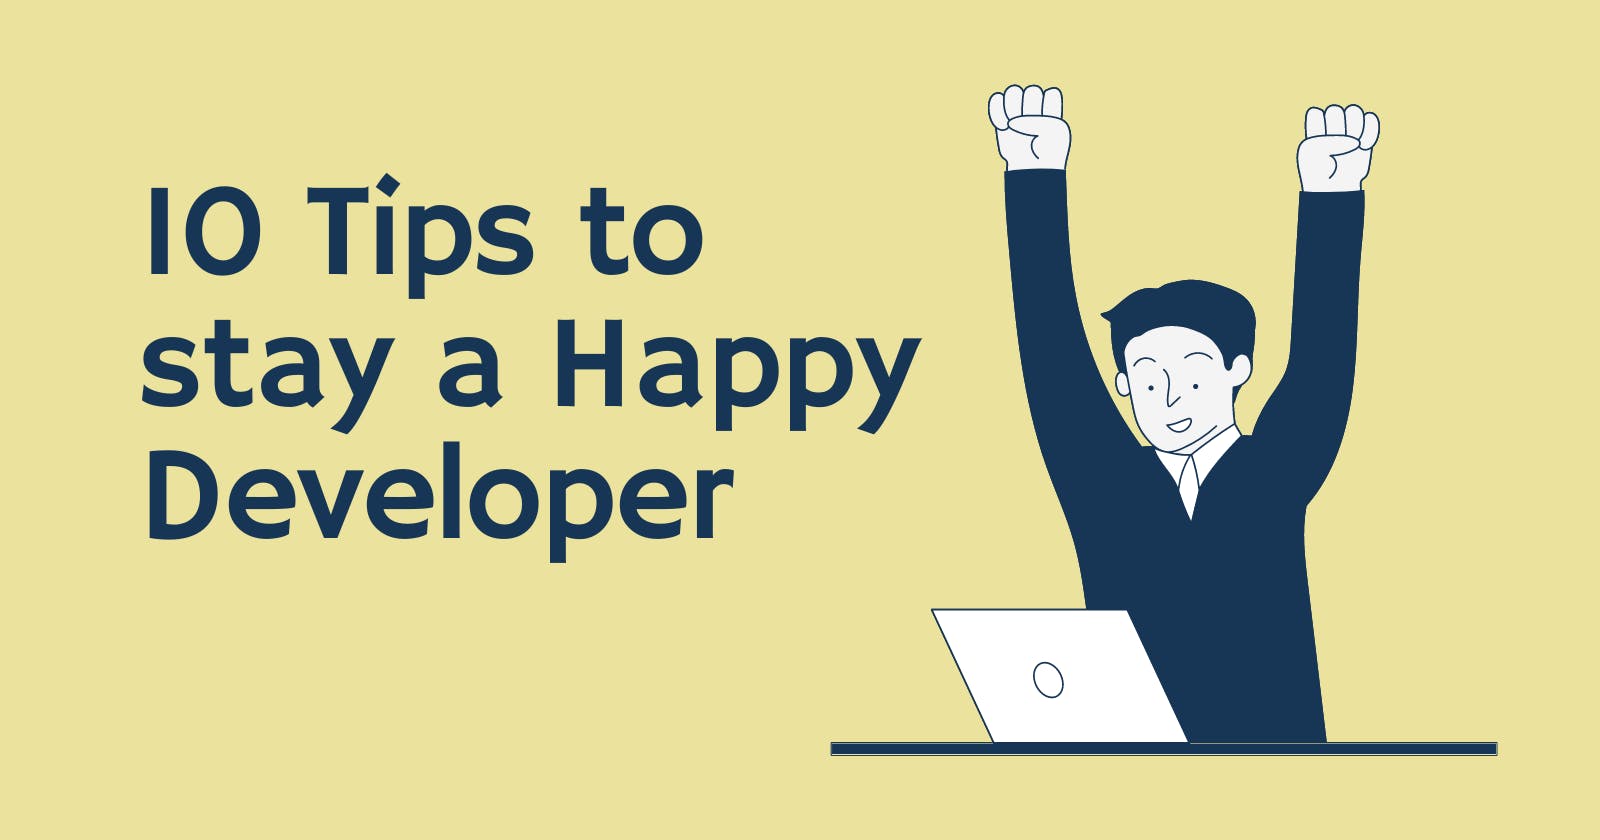 10 Tips to stay a Happy Developer